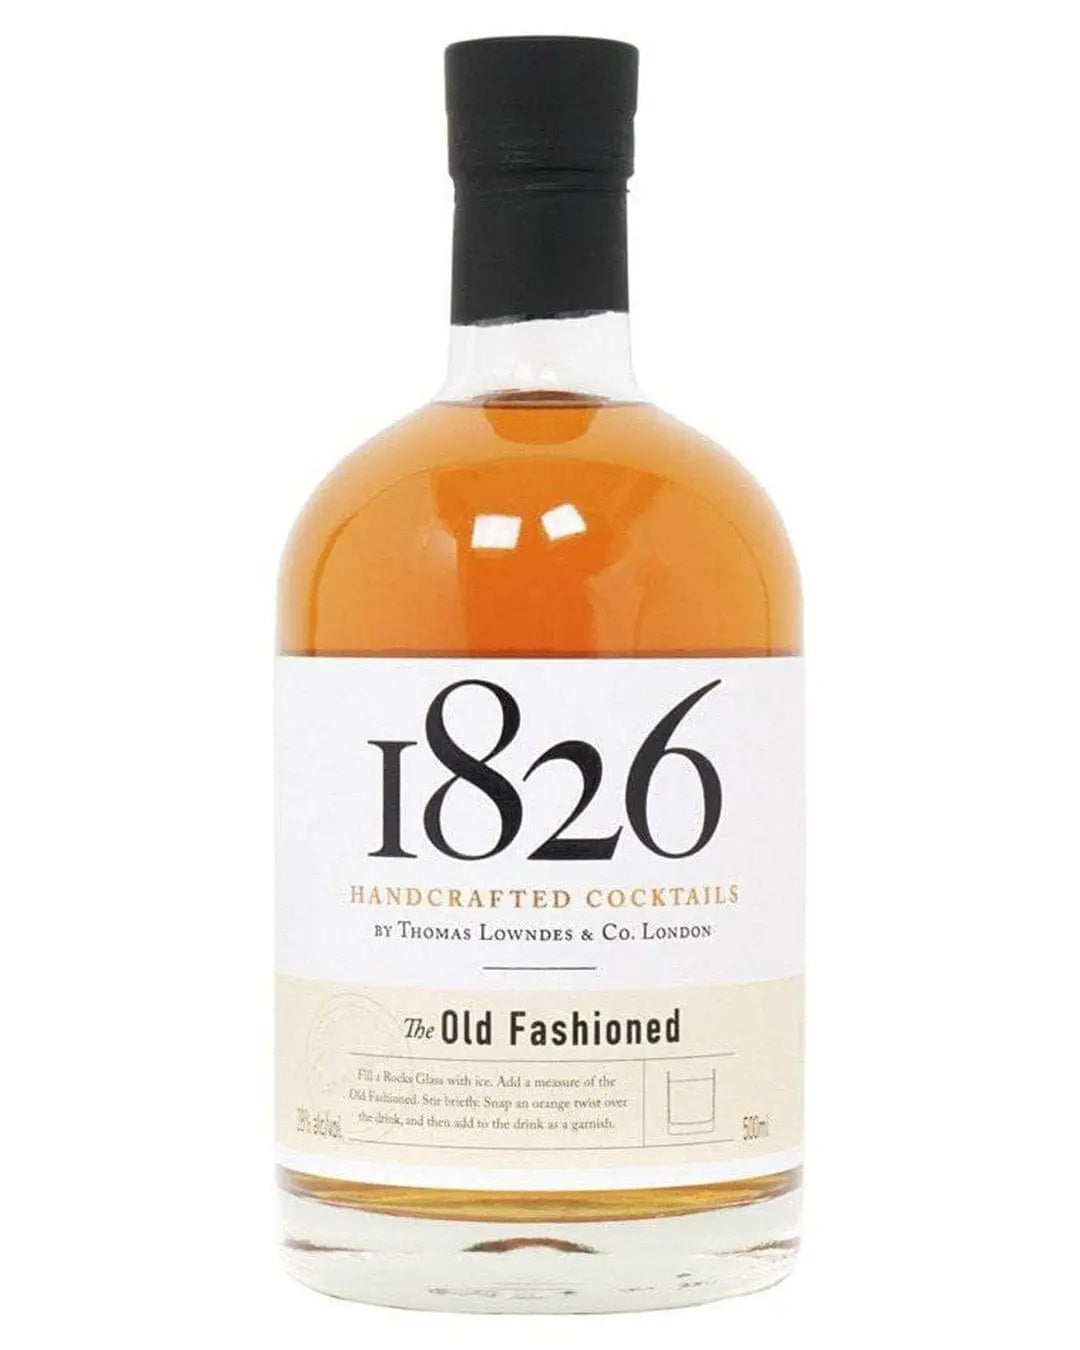 1826 Maker's Mark Old Fashioned Handcrafted Premixed Cocktail, 50 cl Ready Made Cocktails